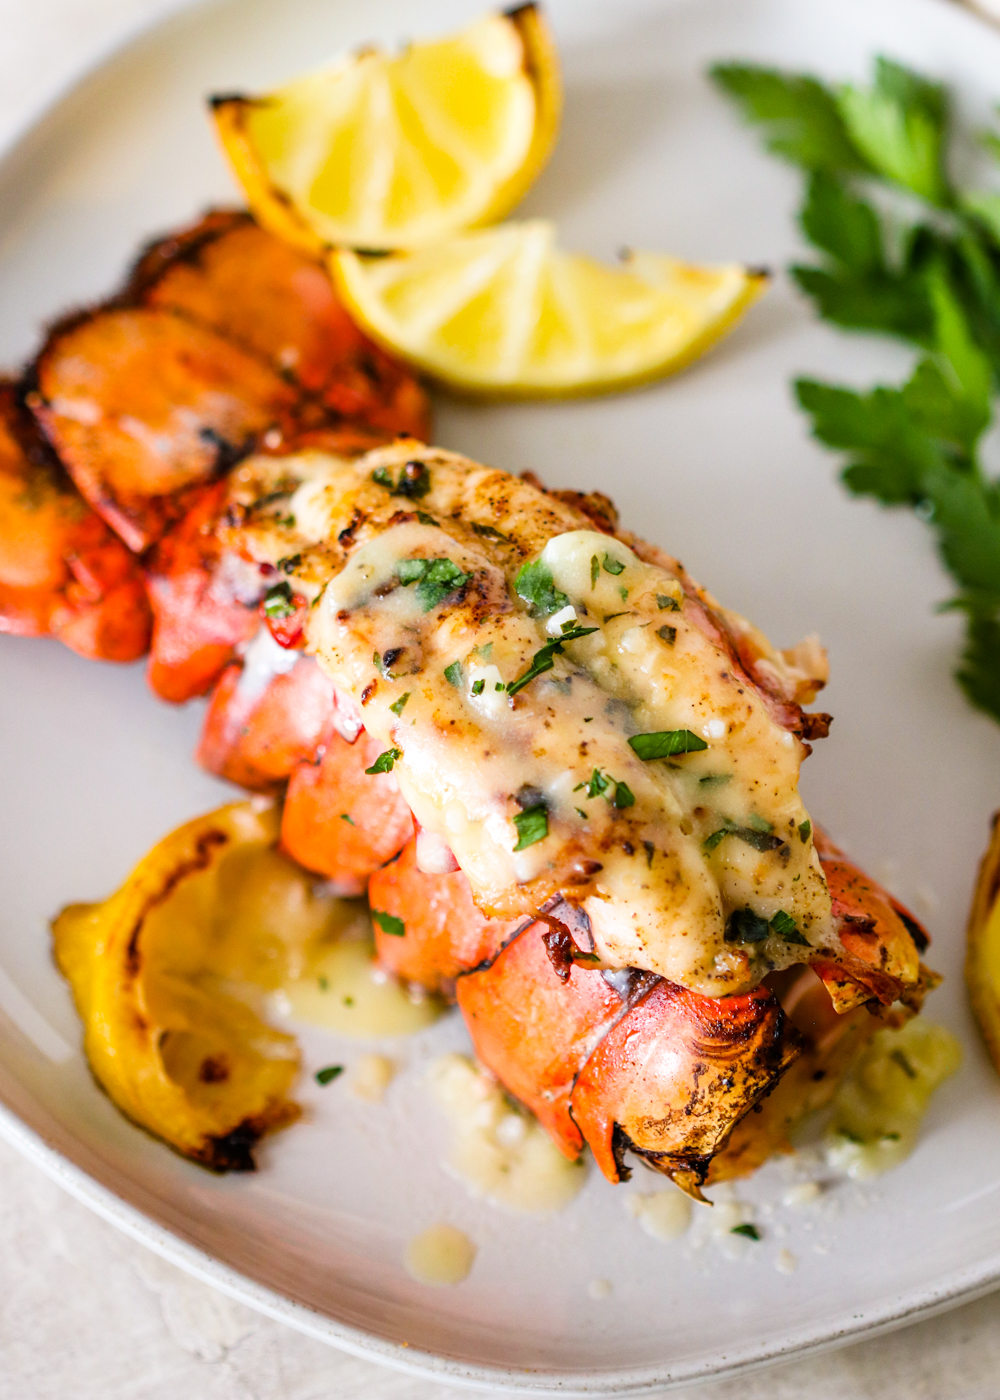 Broiled Lobster Tails with Garlic Lemon Butter | Gimme Delicious